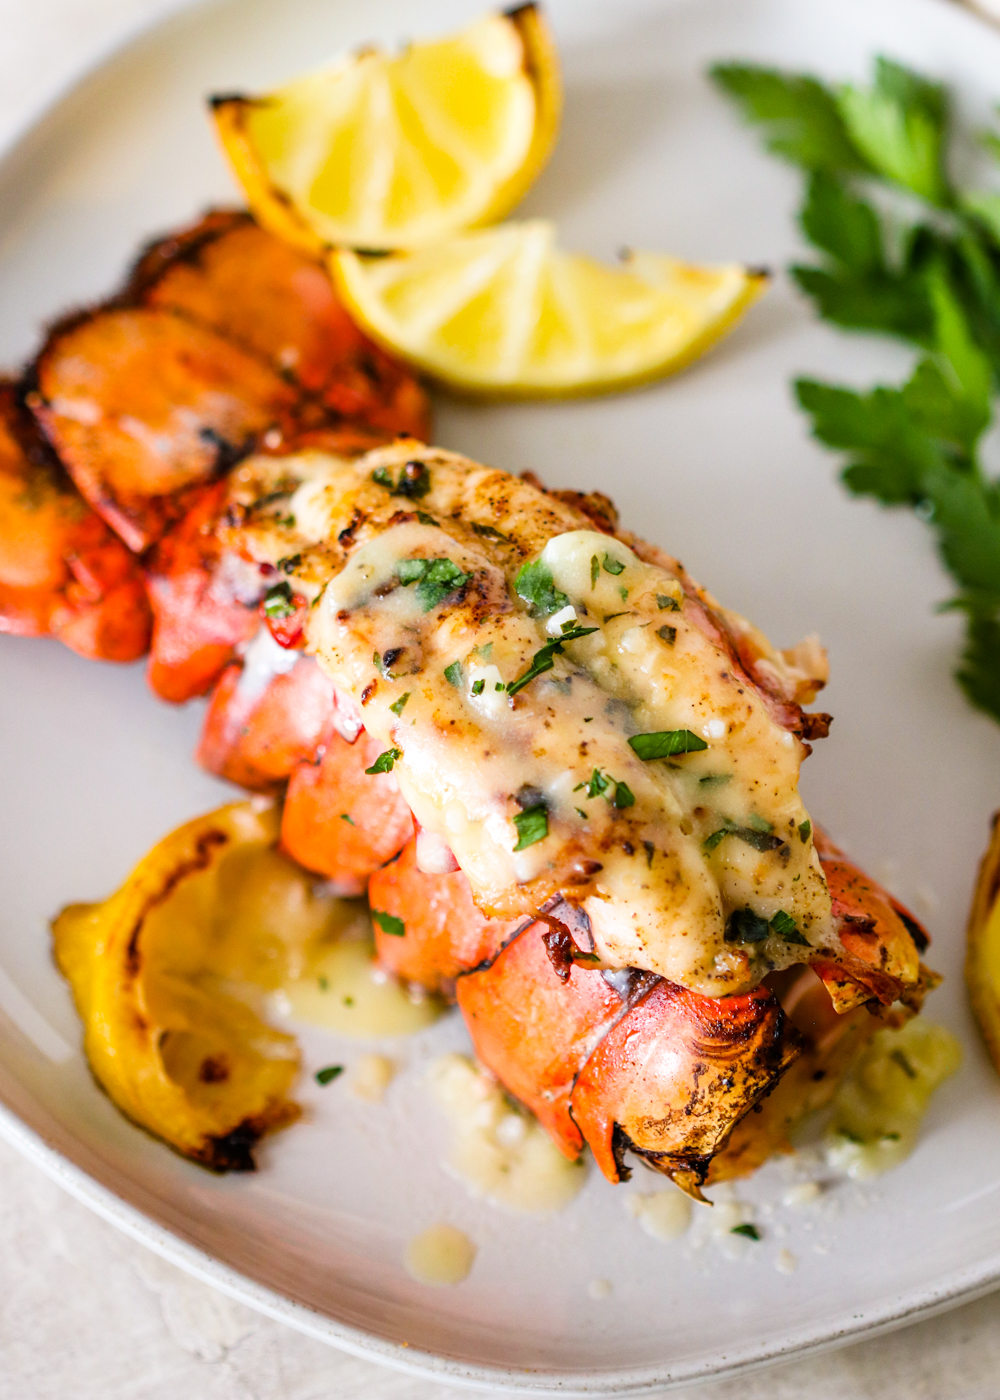 Broiled Lobster Tails with Garlic Lemon Butter | Gimme Delicious